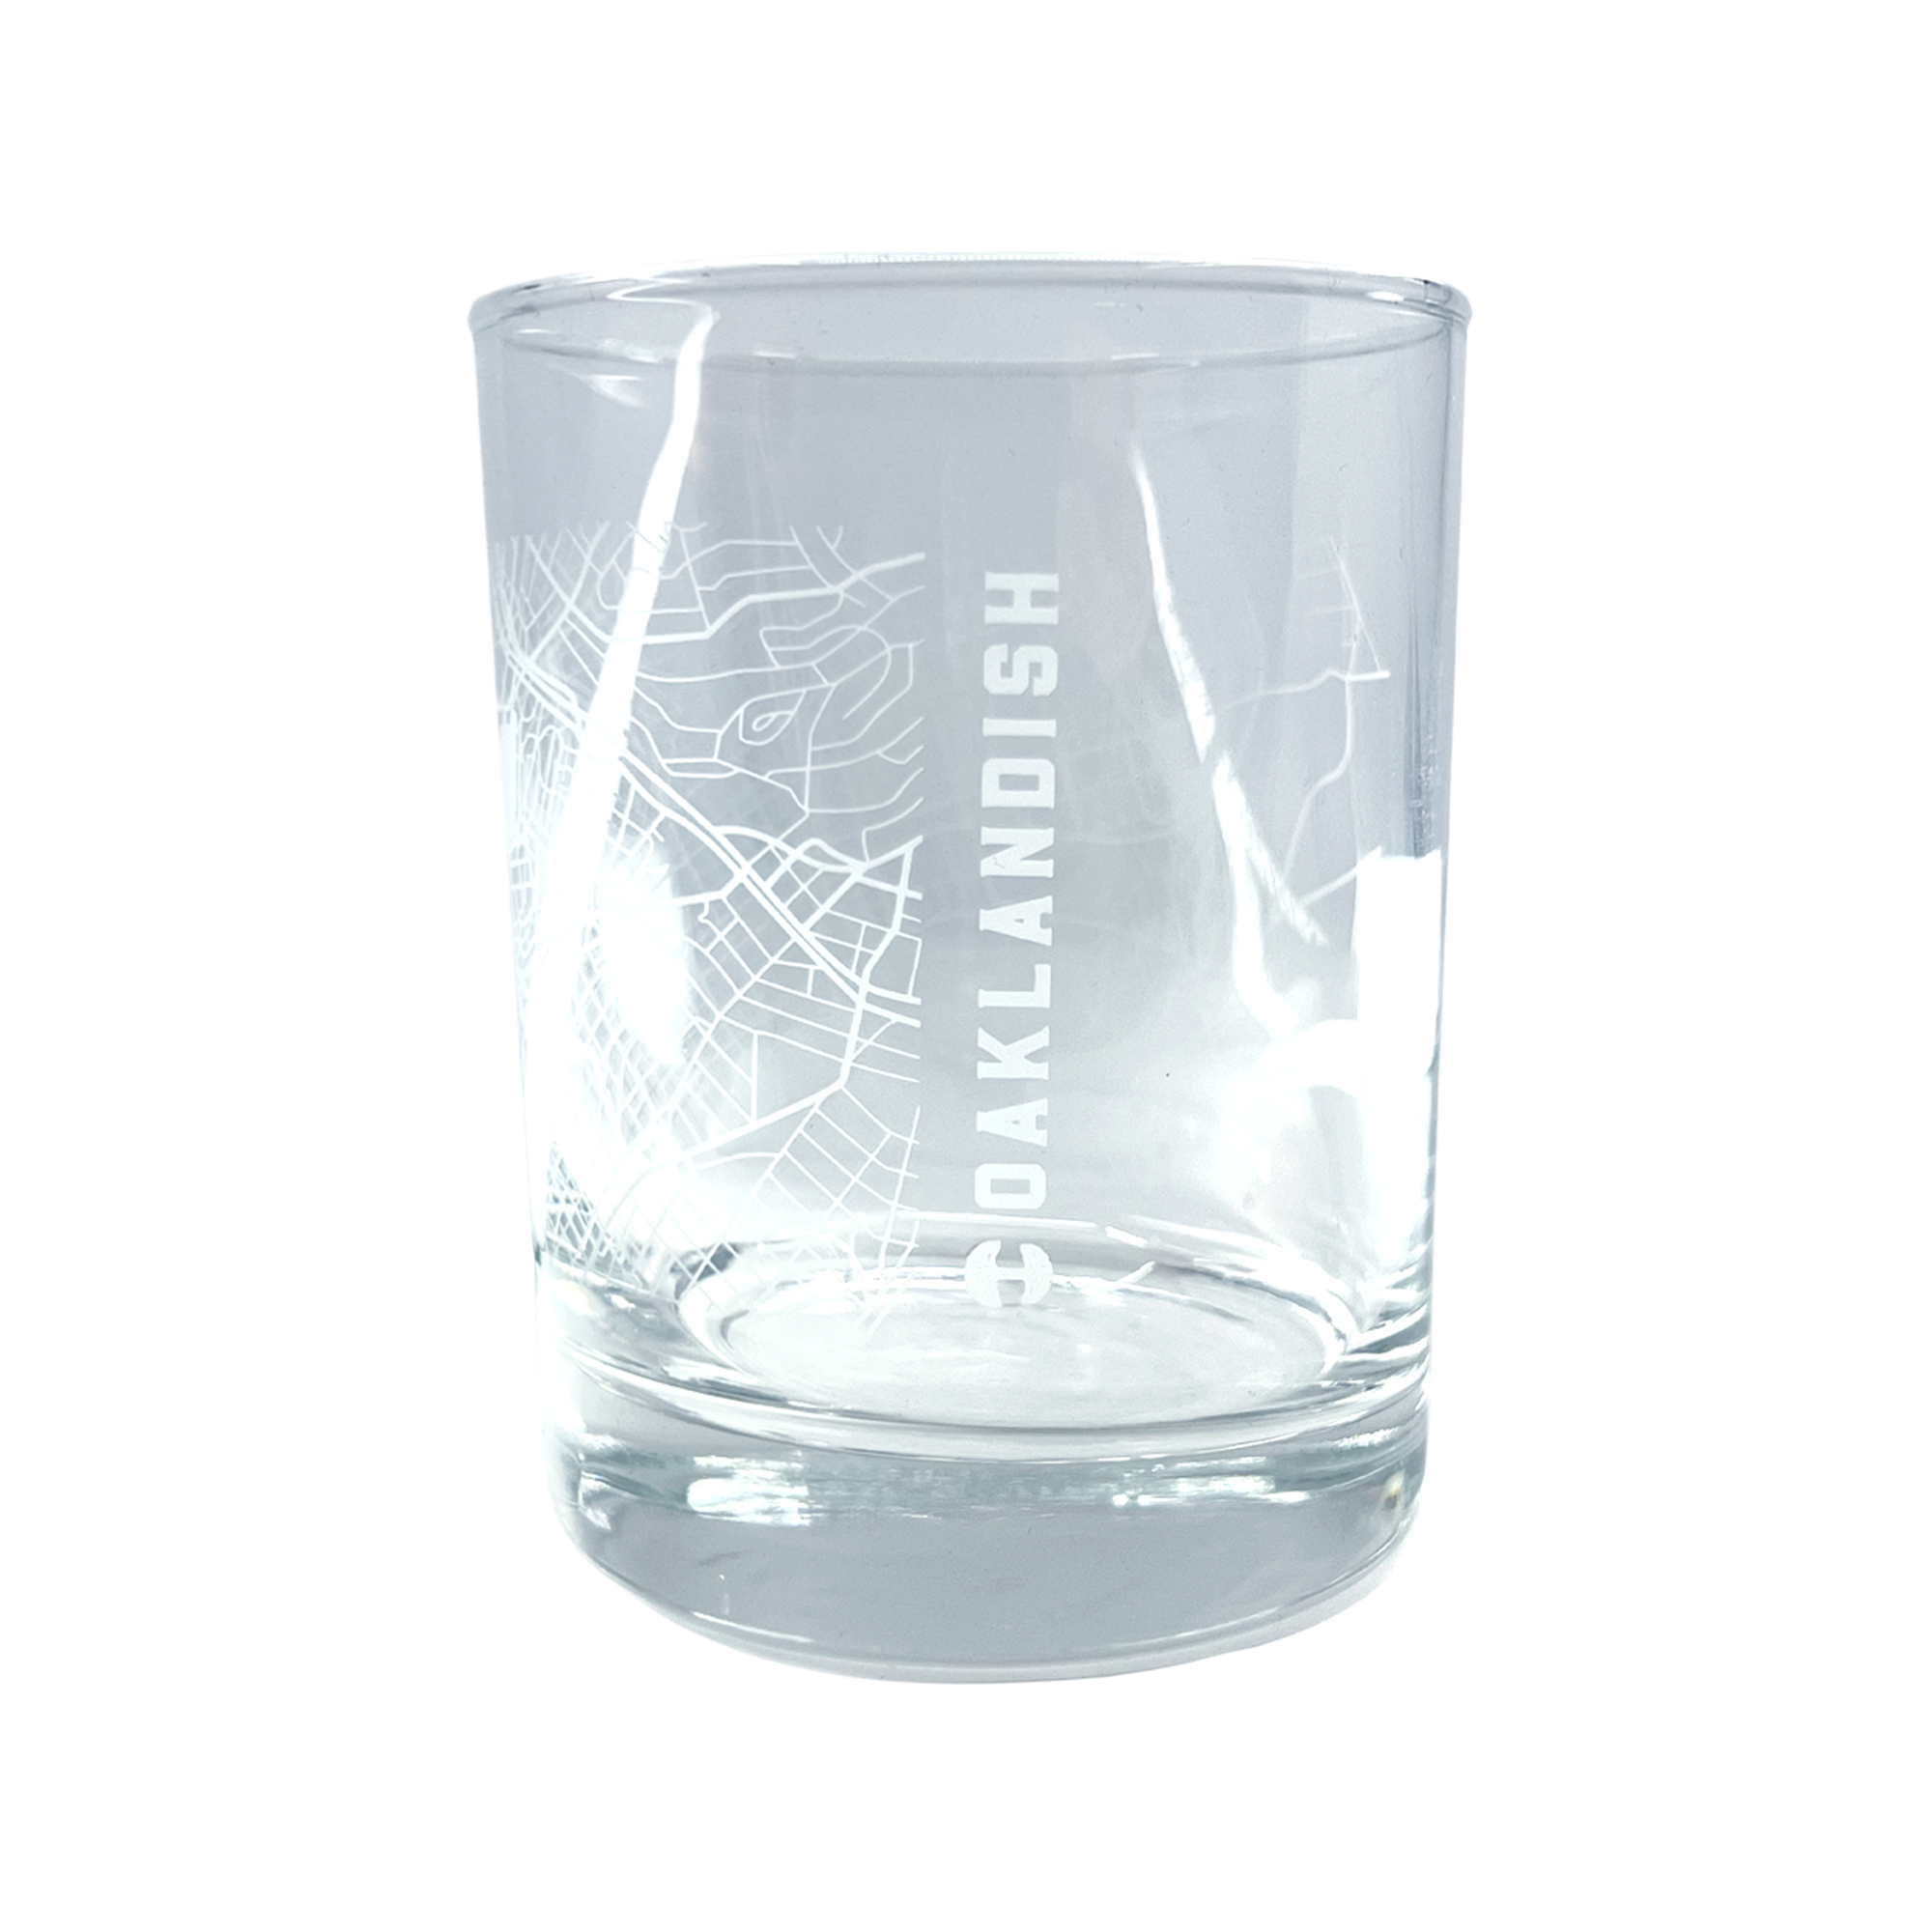 The reverse side of a clear glass whisky tumbler with an etched aerial map of Oakland & Oaklandish wordmark.